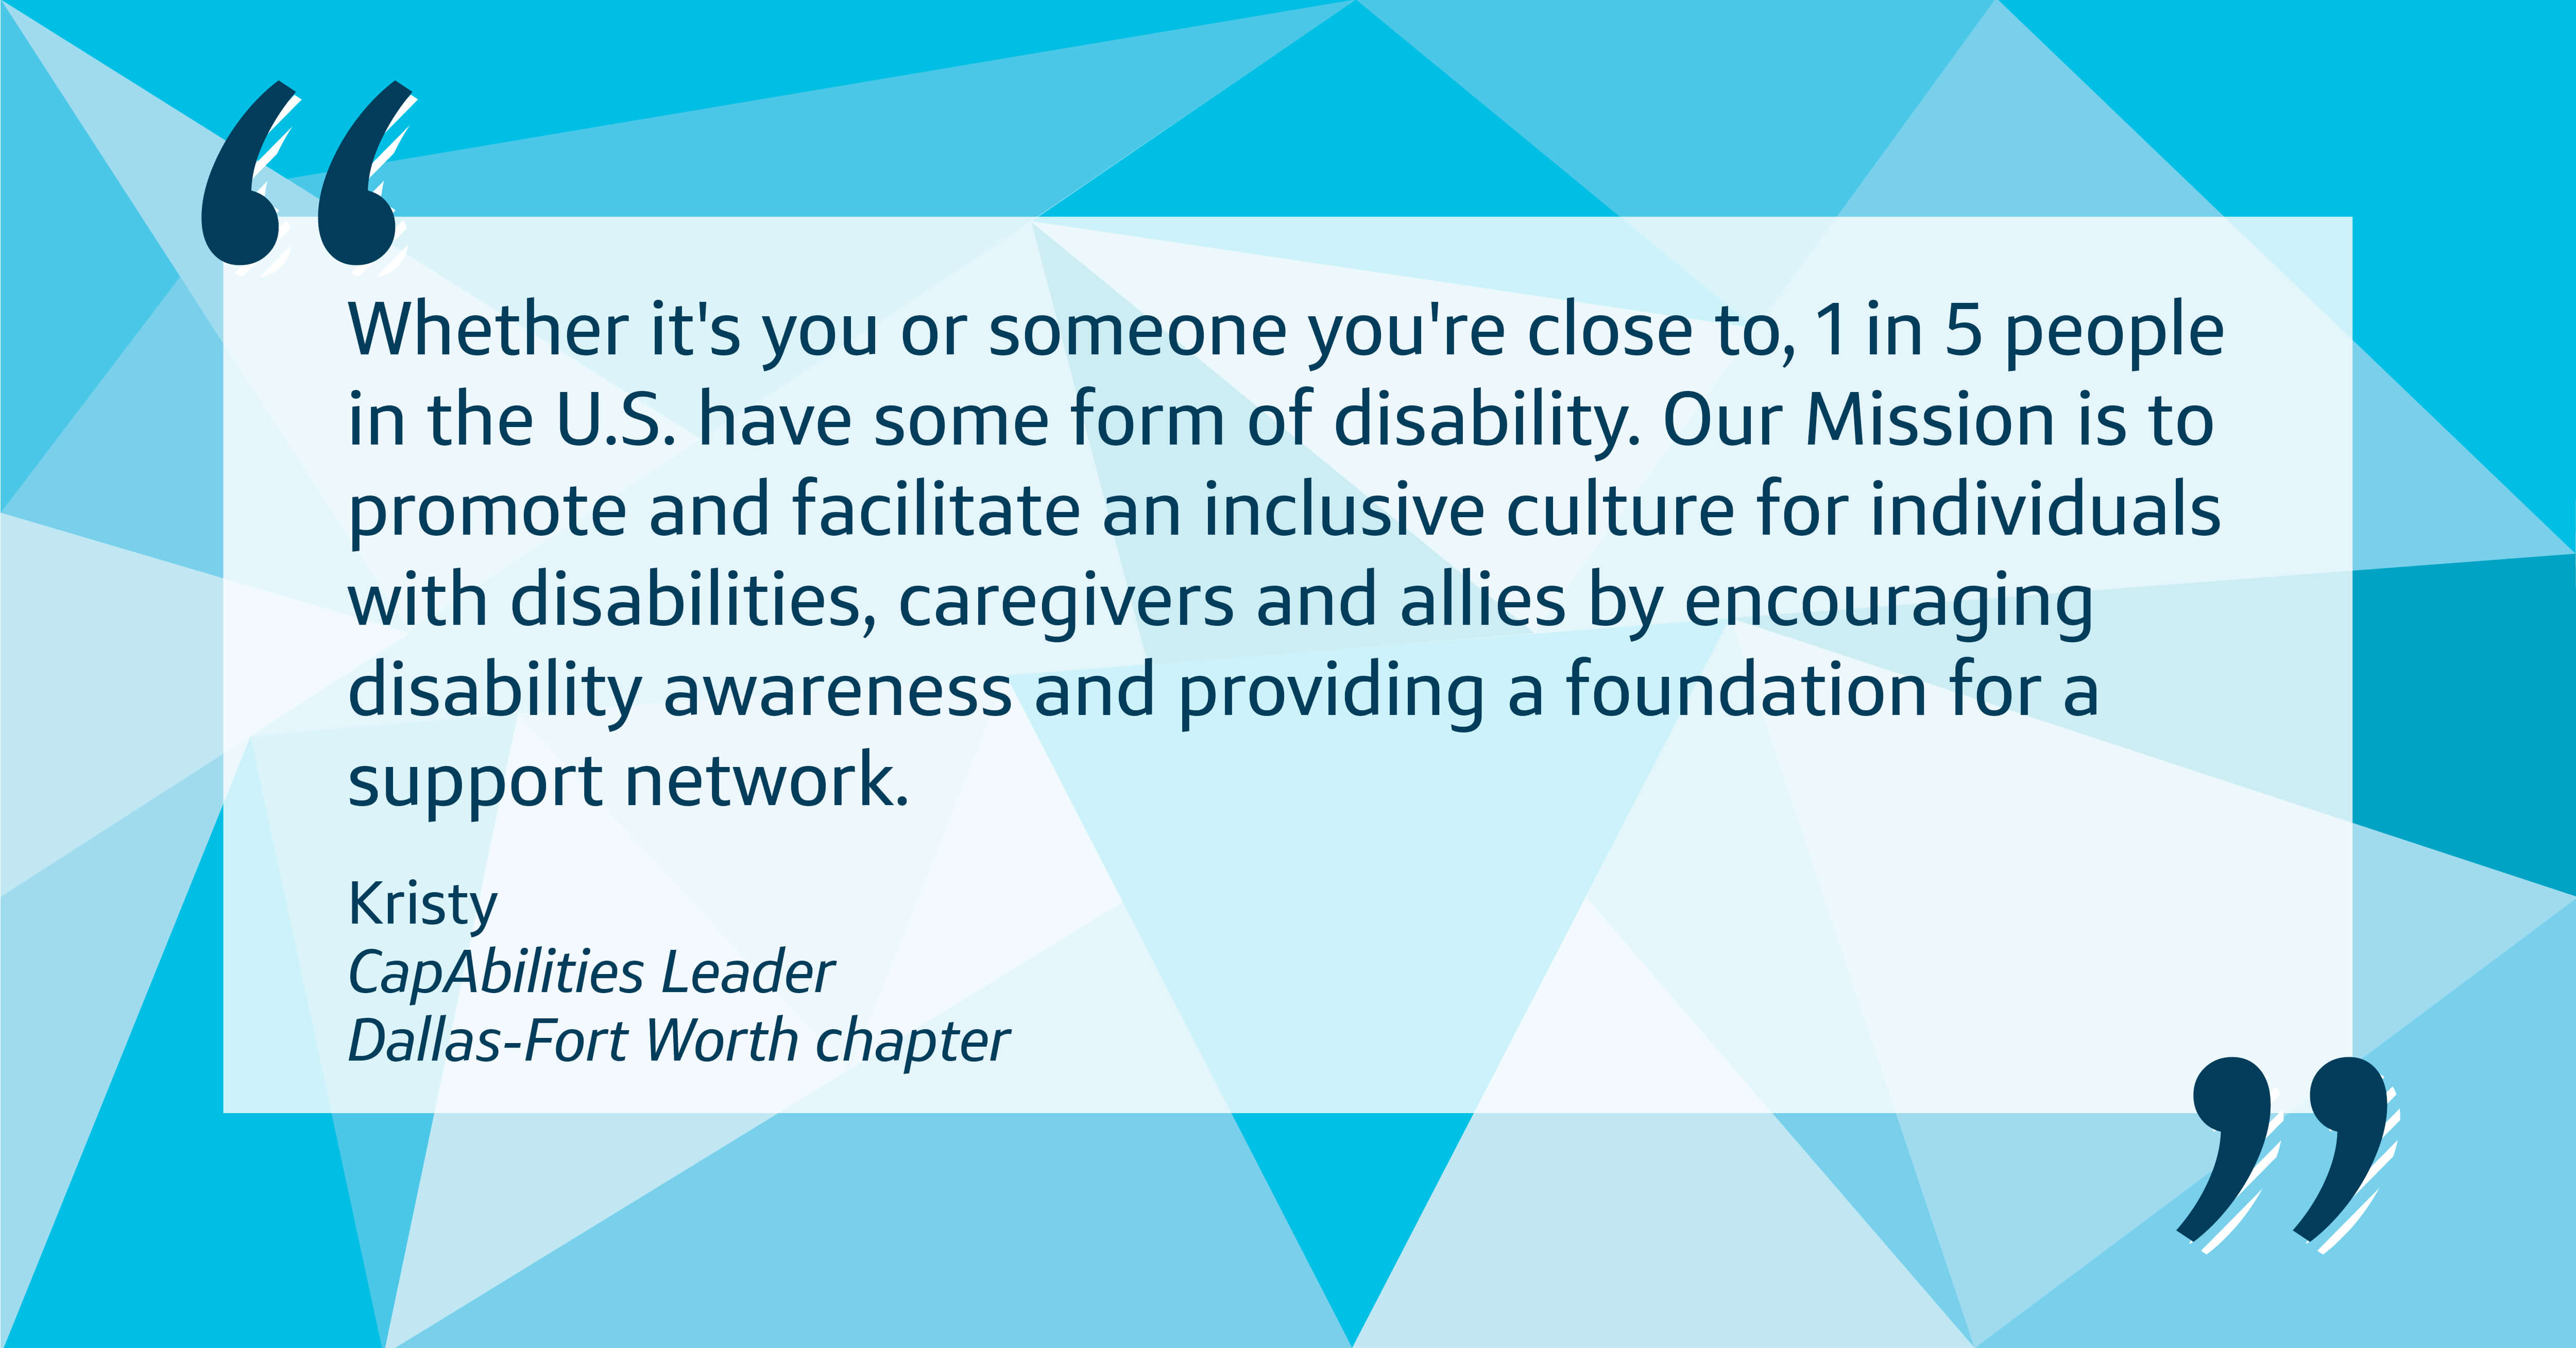 1 in 5 people in the U.S. have some form of disability. Our mission at Capital One is to promote and facilitate an inclusive culture.